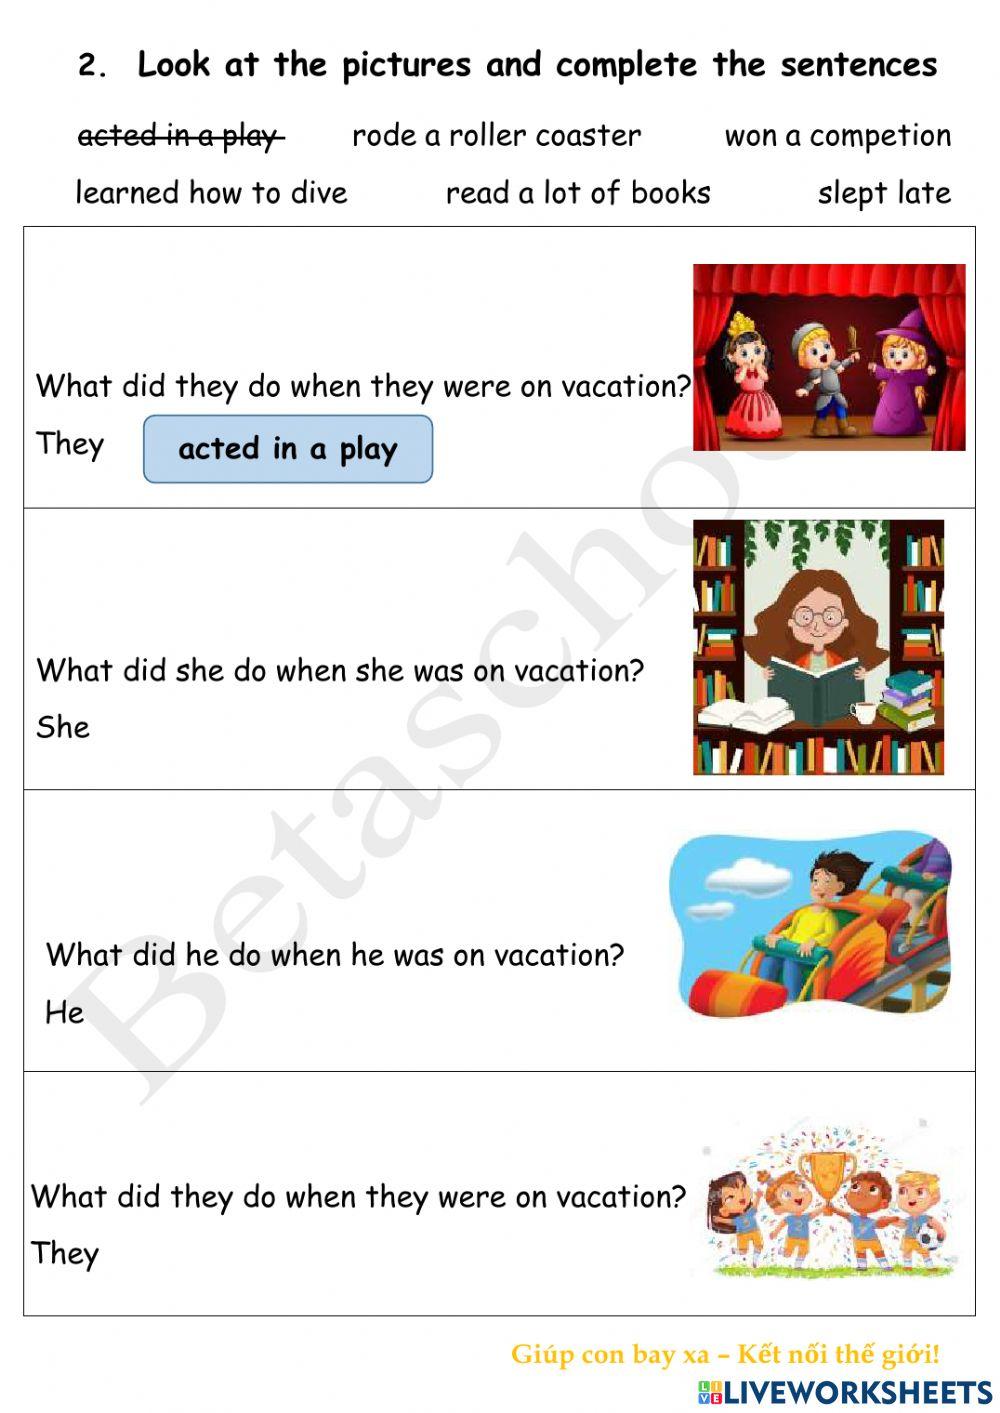 Topic Vacation - 3A